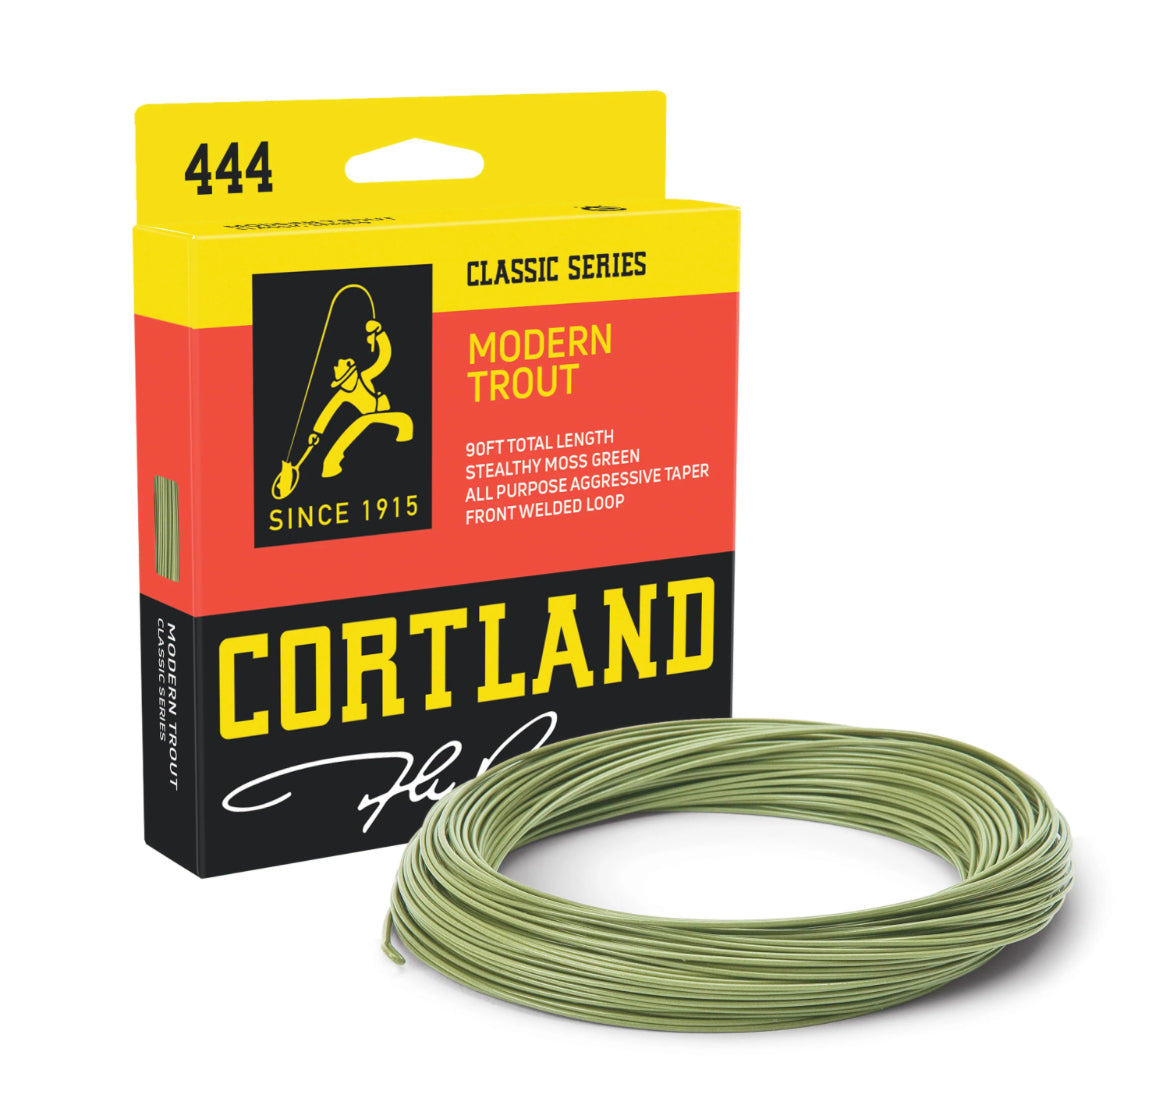 Cortland Guide Series Performance Combo – The Canyon Fly Shop